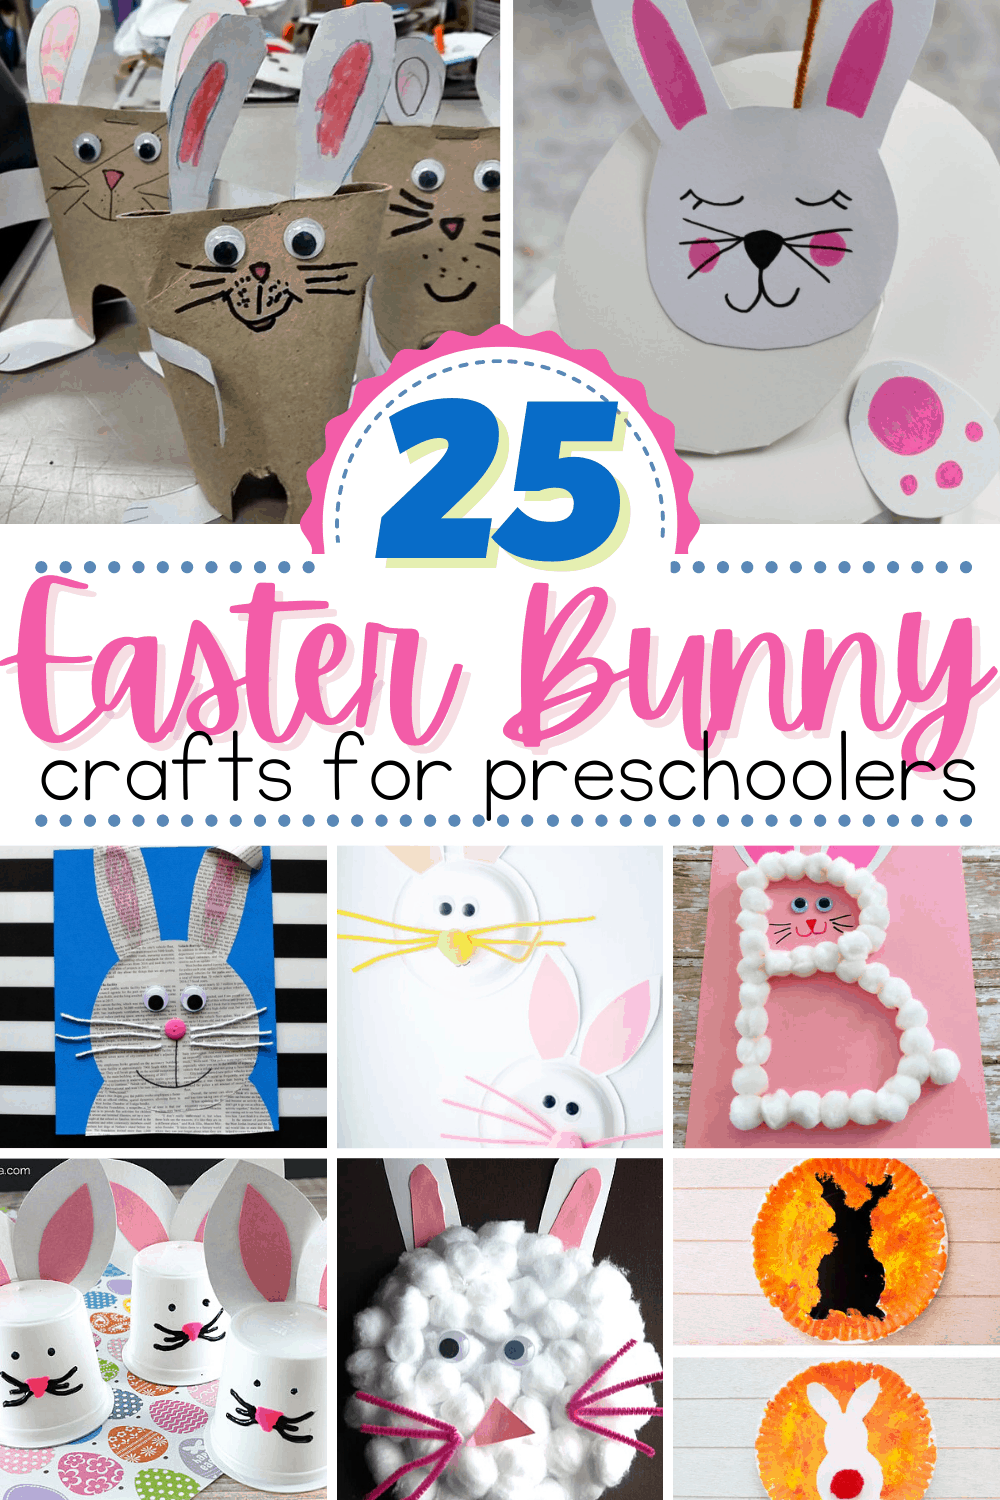 easter-bunny-crafts-1-1 Cute Bunny Crafts